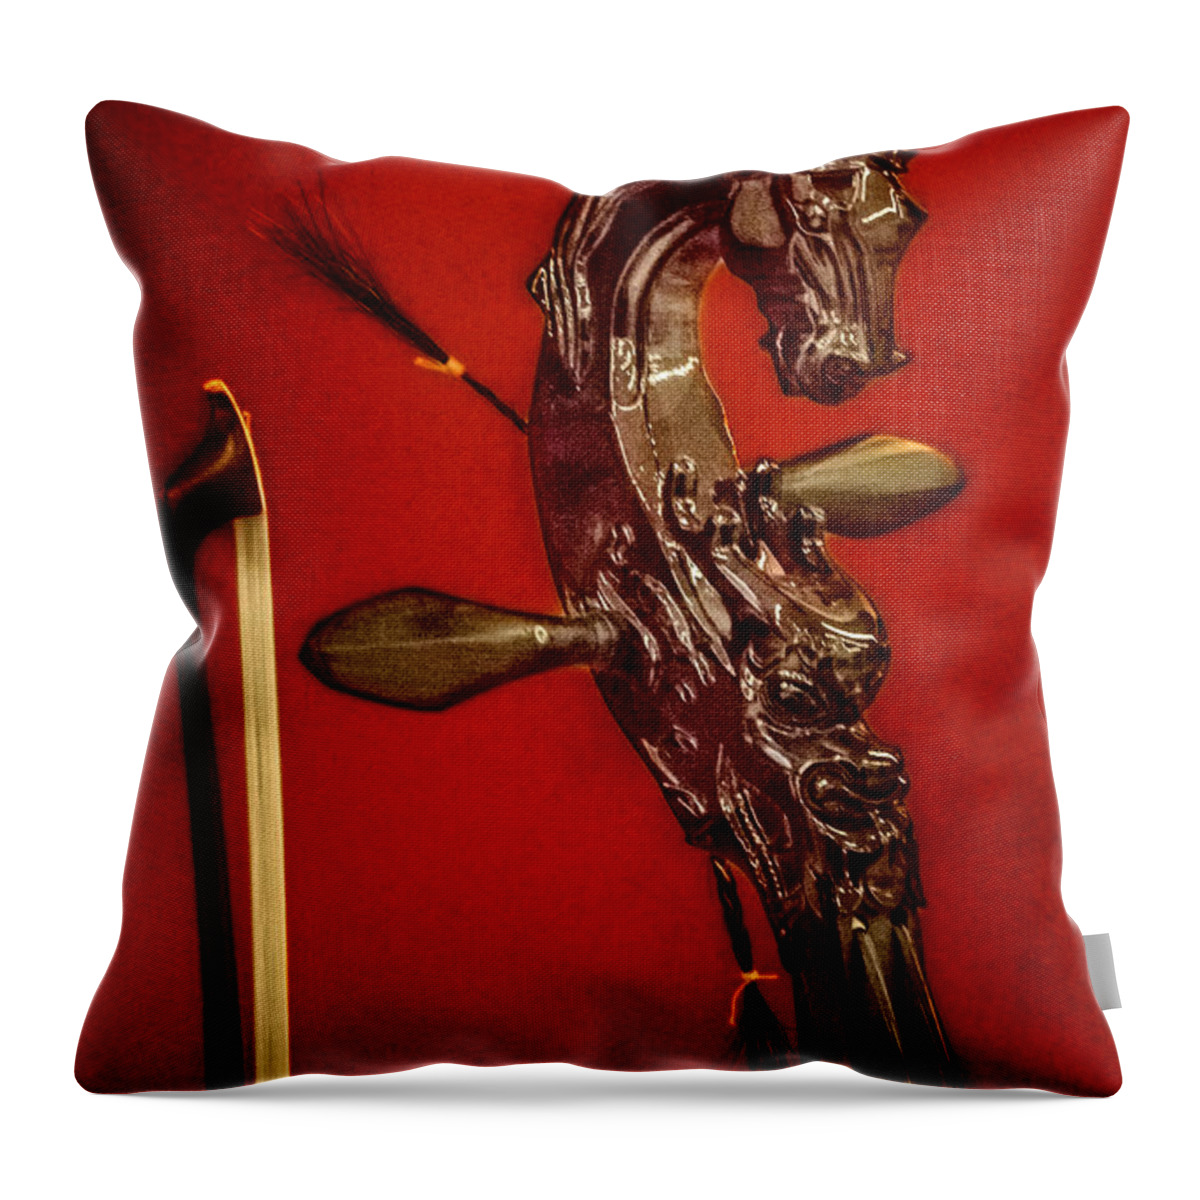 Lute Throw Pillow featuring the digital art Bowed Lute by Georgianne Giese